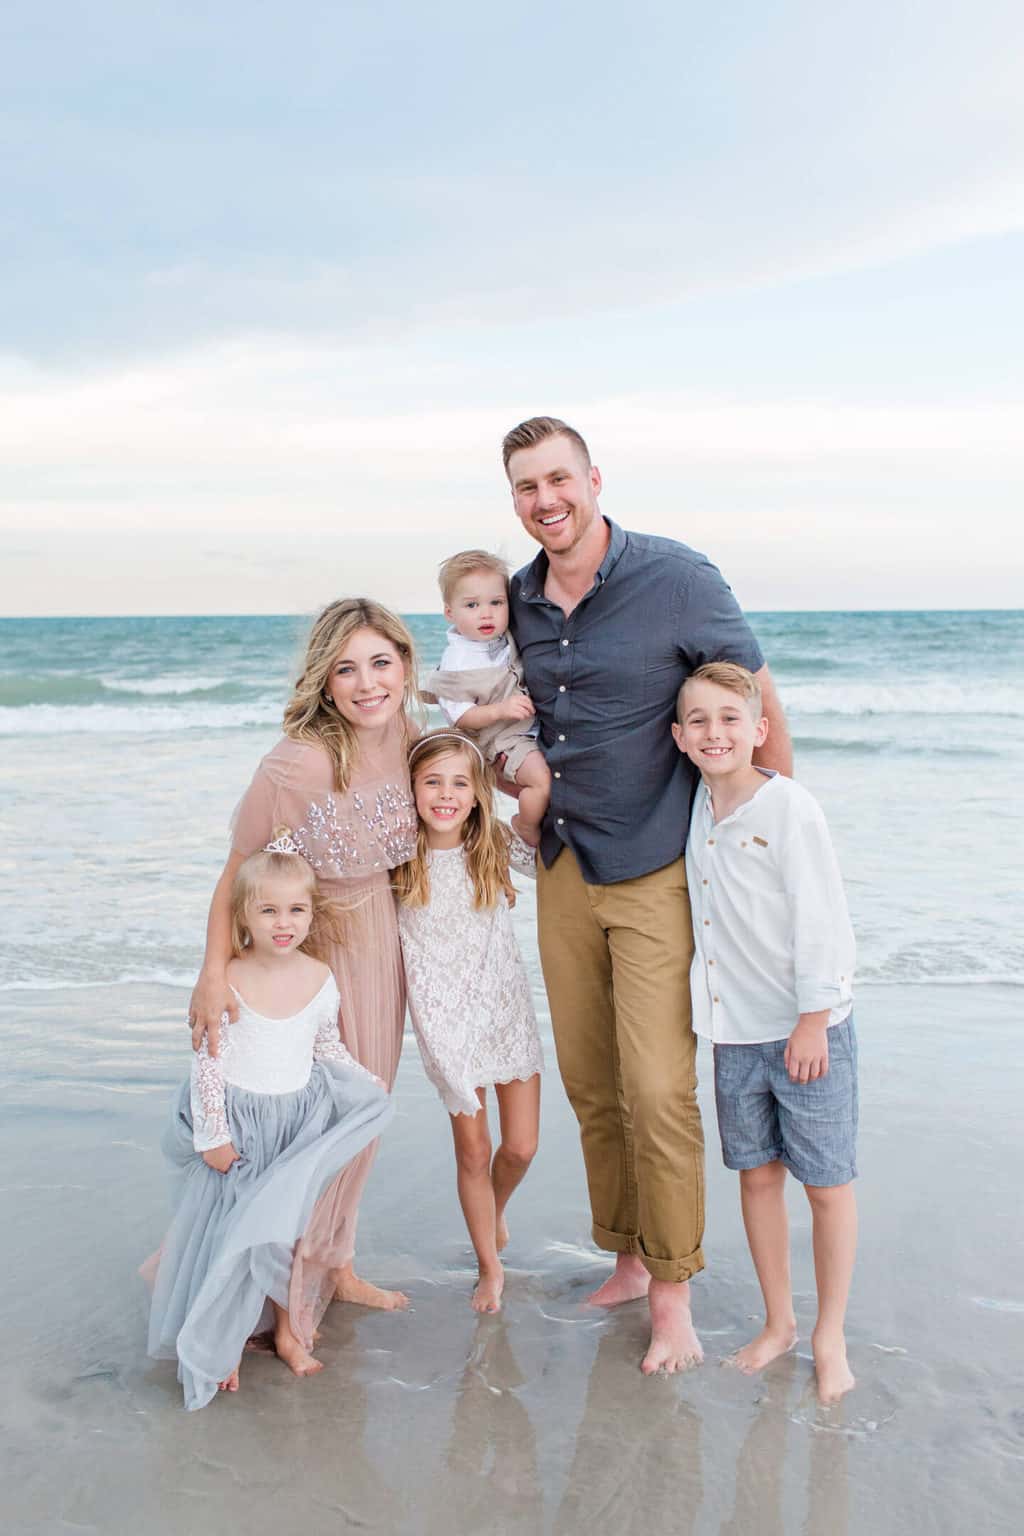 30+ Best Beach Family Photo Ideas: Tips for Getting the Best Pictures